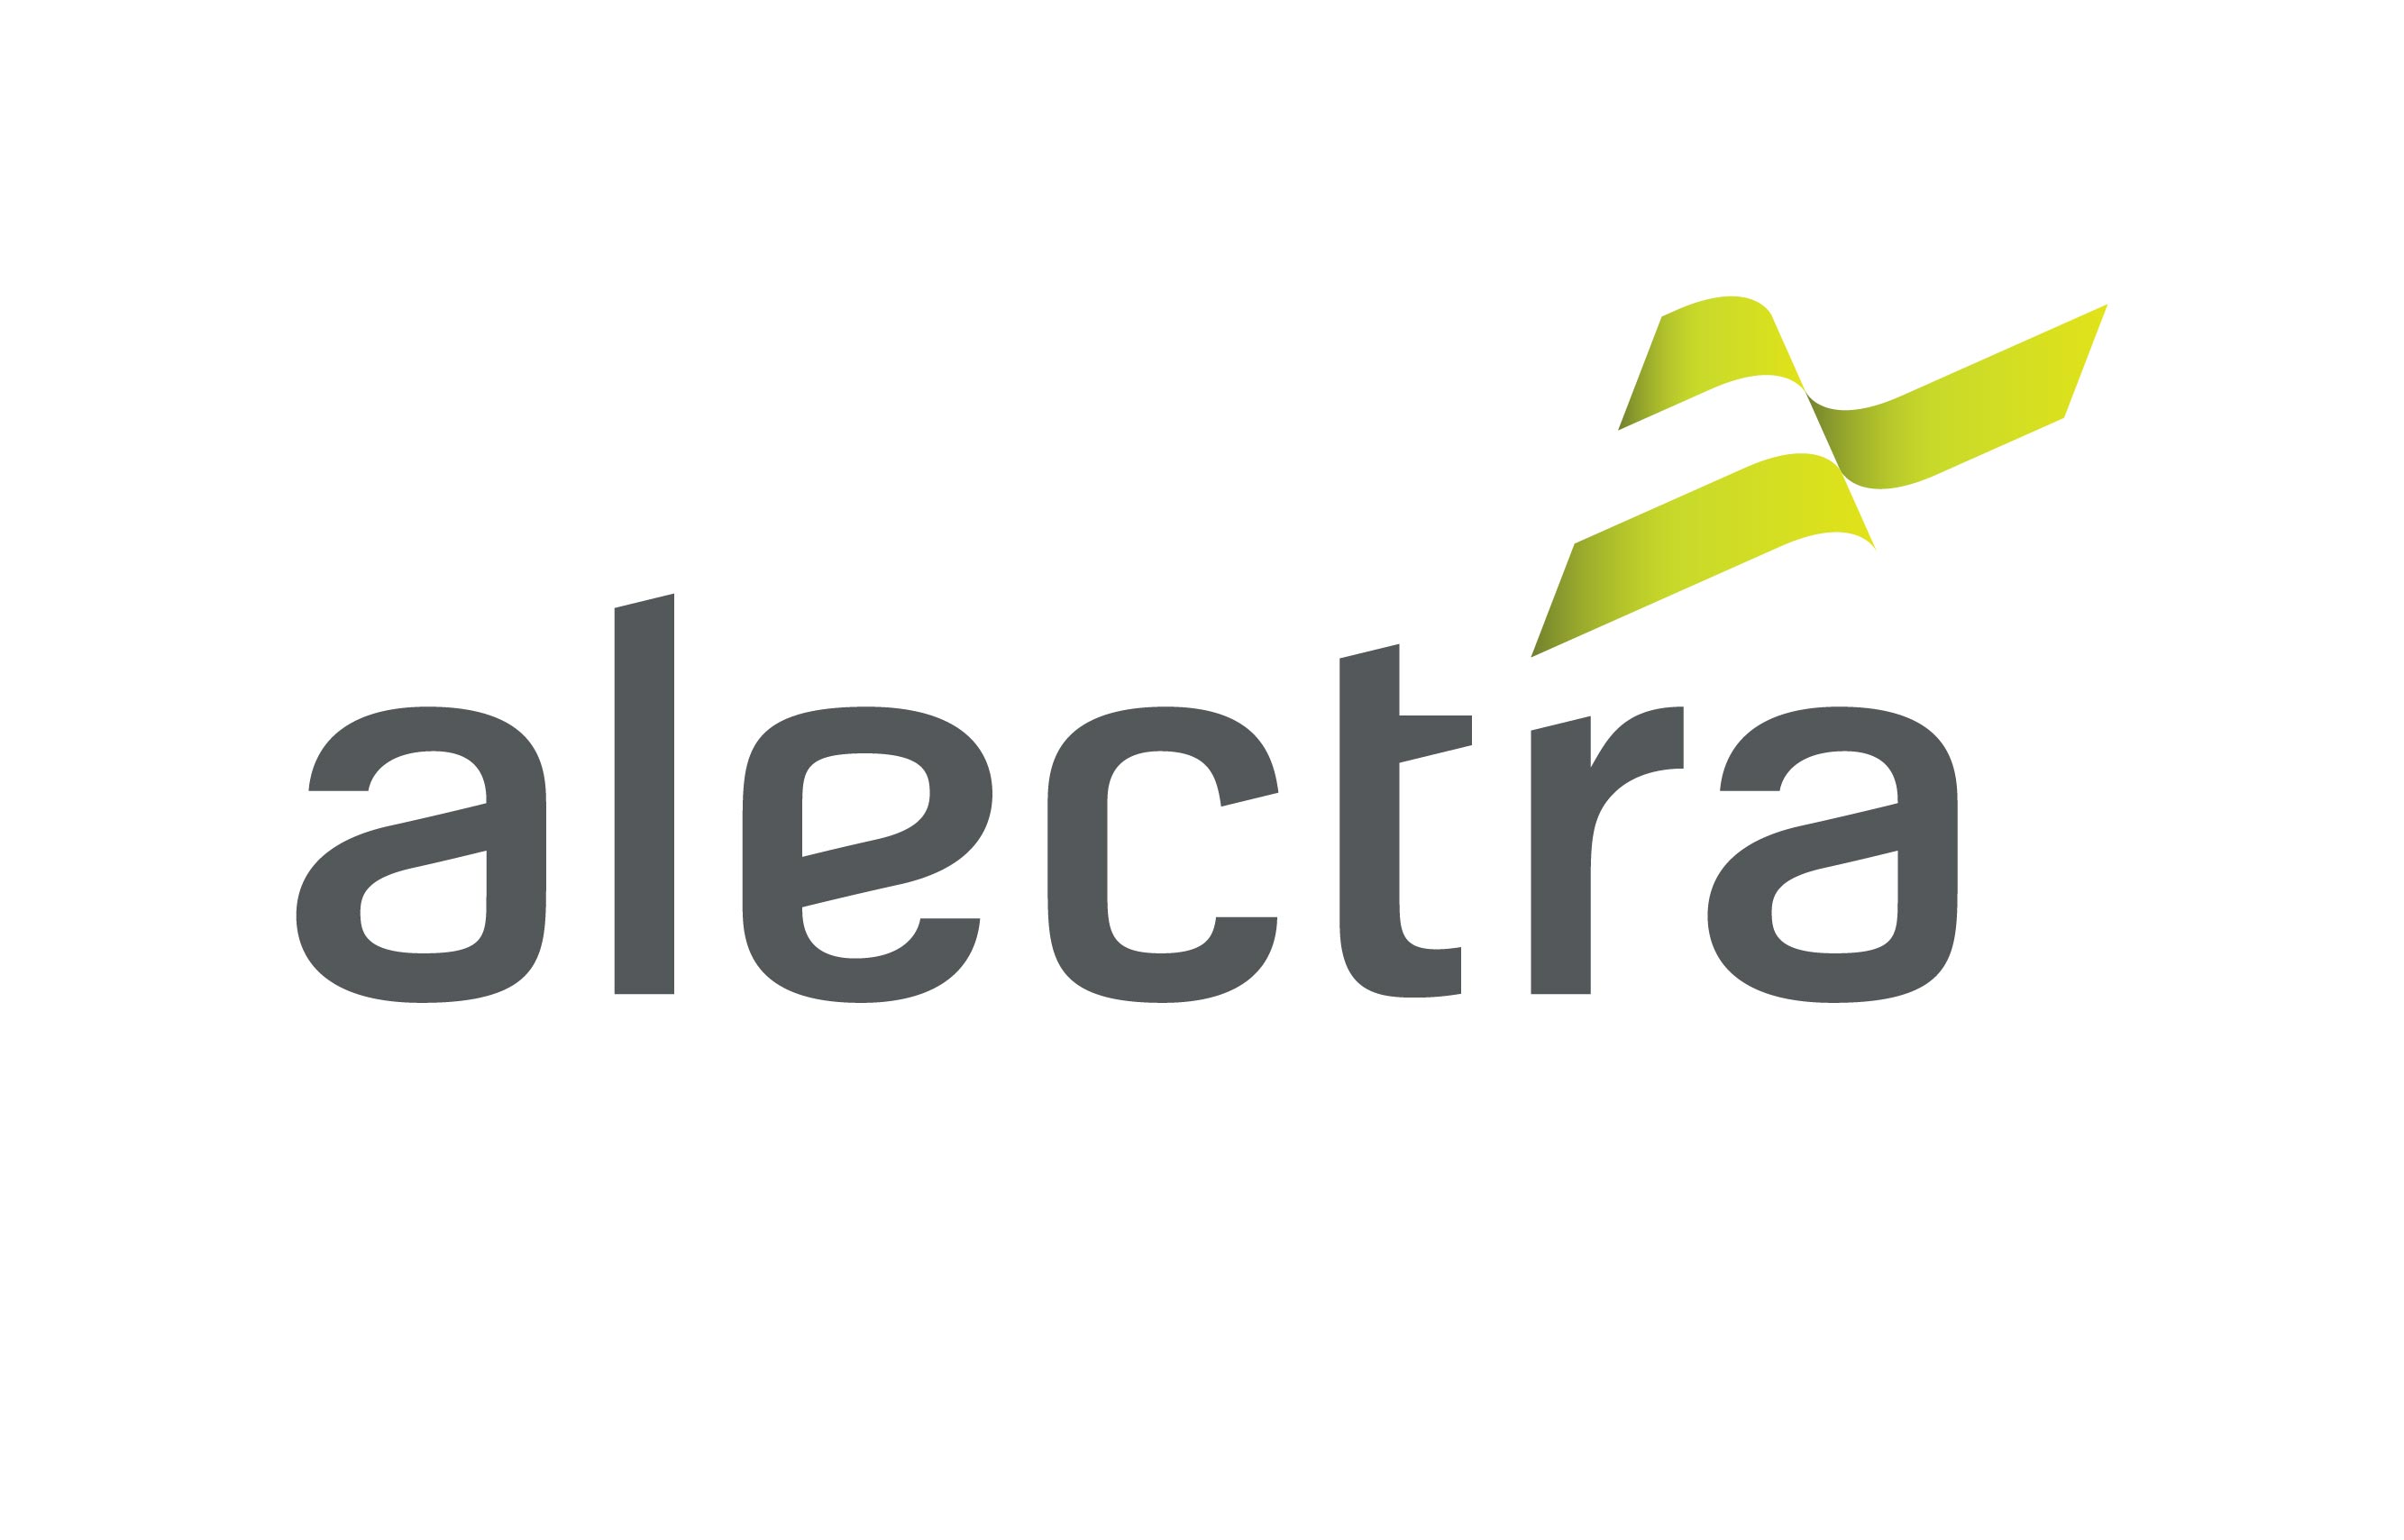 AlectraCARES Community Support logo